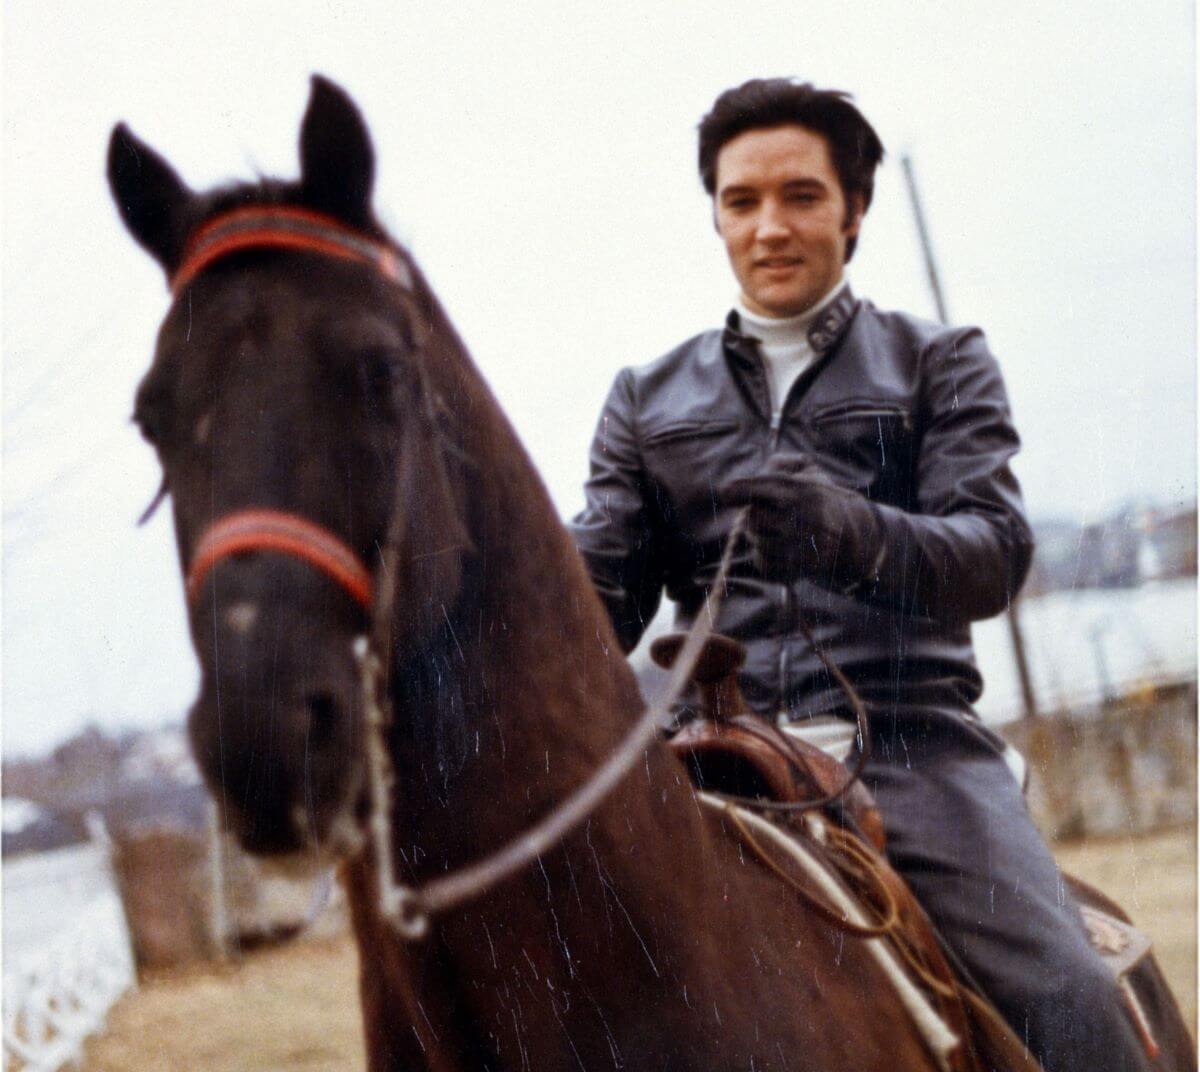 Elvis wears a black leather jacket and rides a horse.